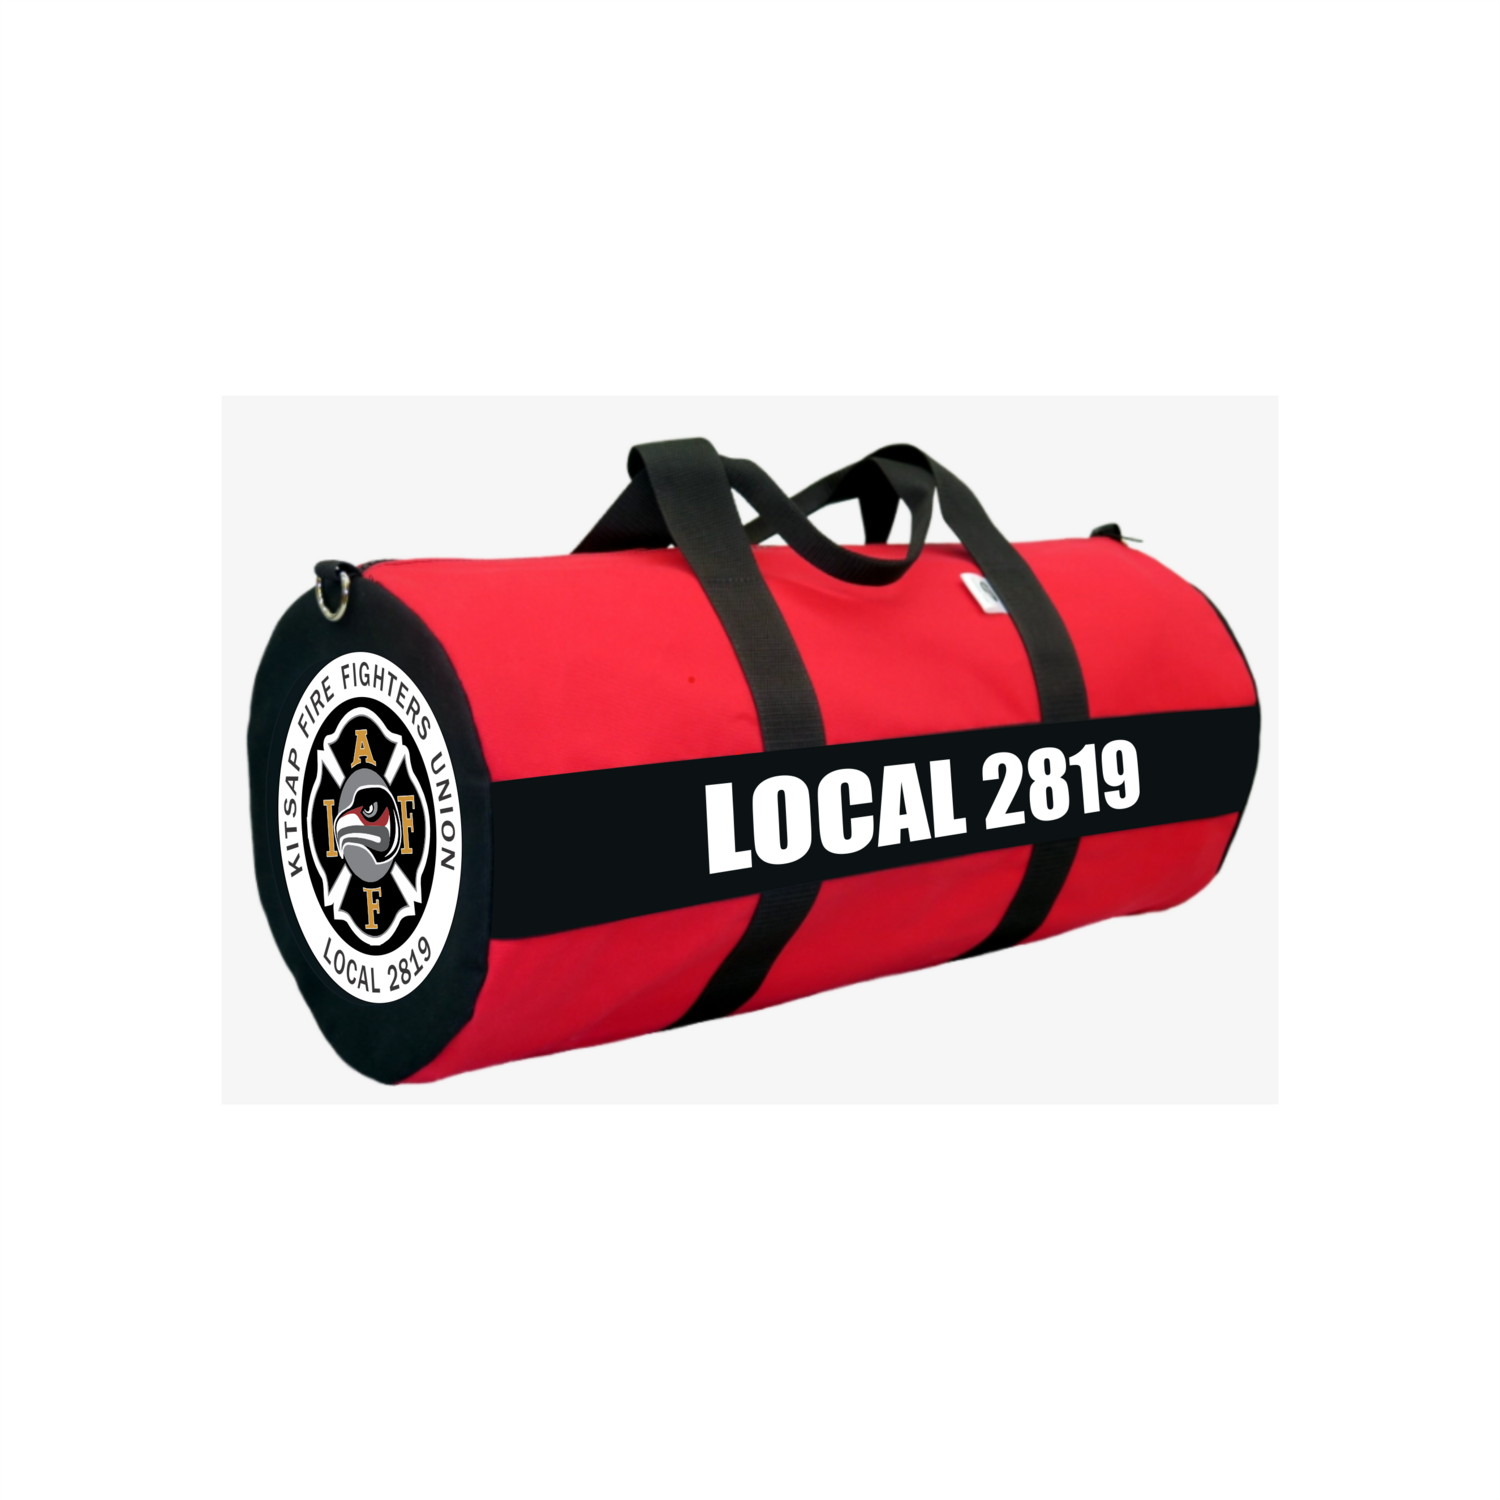 Local 2819 Personalized Duffle Bag